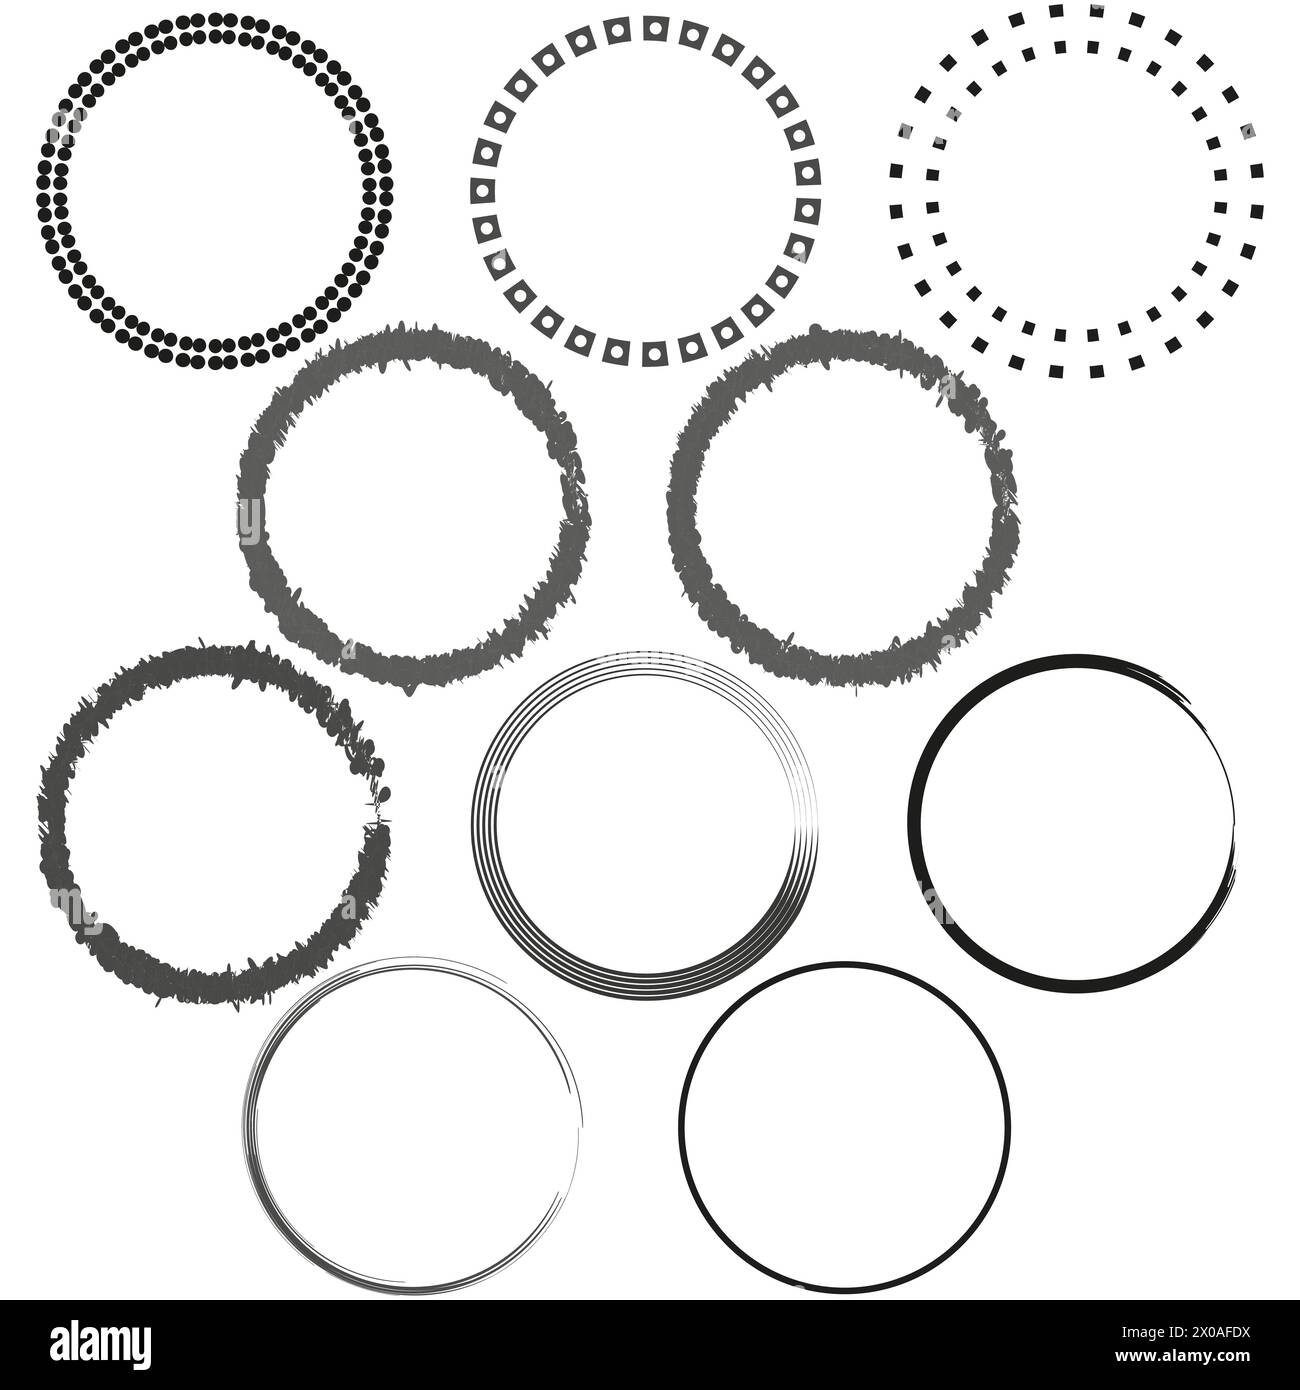 Assorted circular frames set. Dotted, dashed, and grunge circle borders. Design elements collection. Vector illustration. EPS 10. Stock Vector